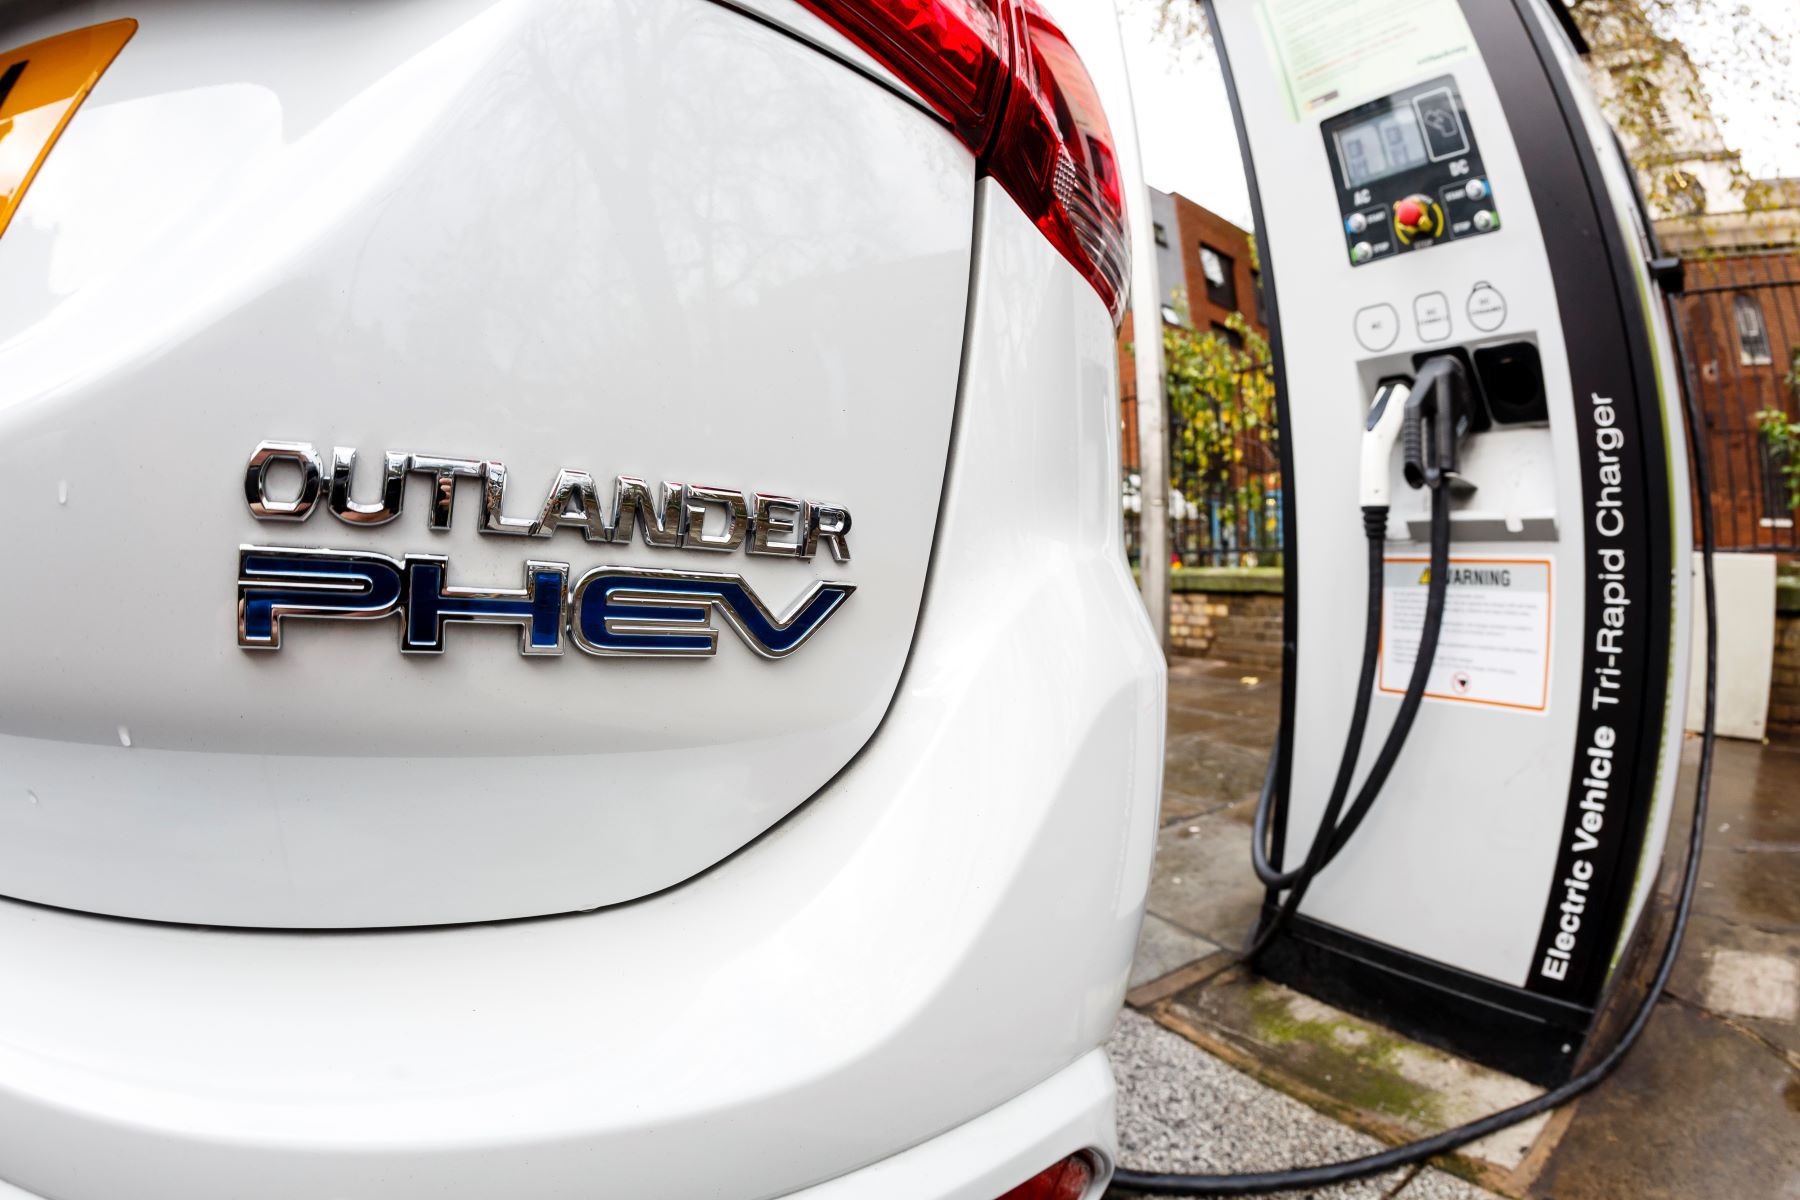 A Mitsubishi Outlander PHEV plugged into a charging station on a London street